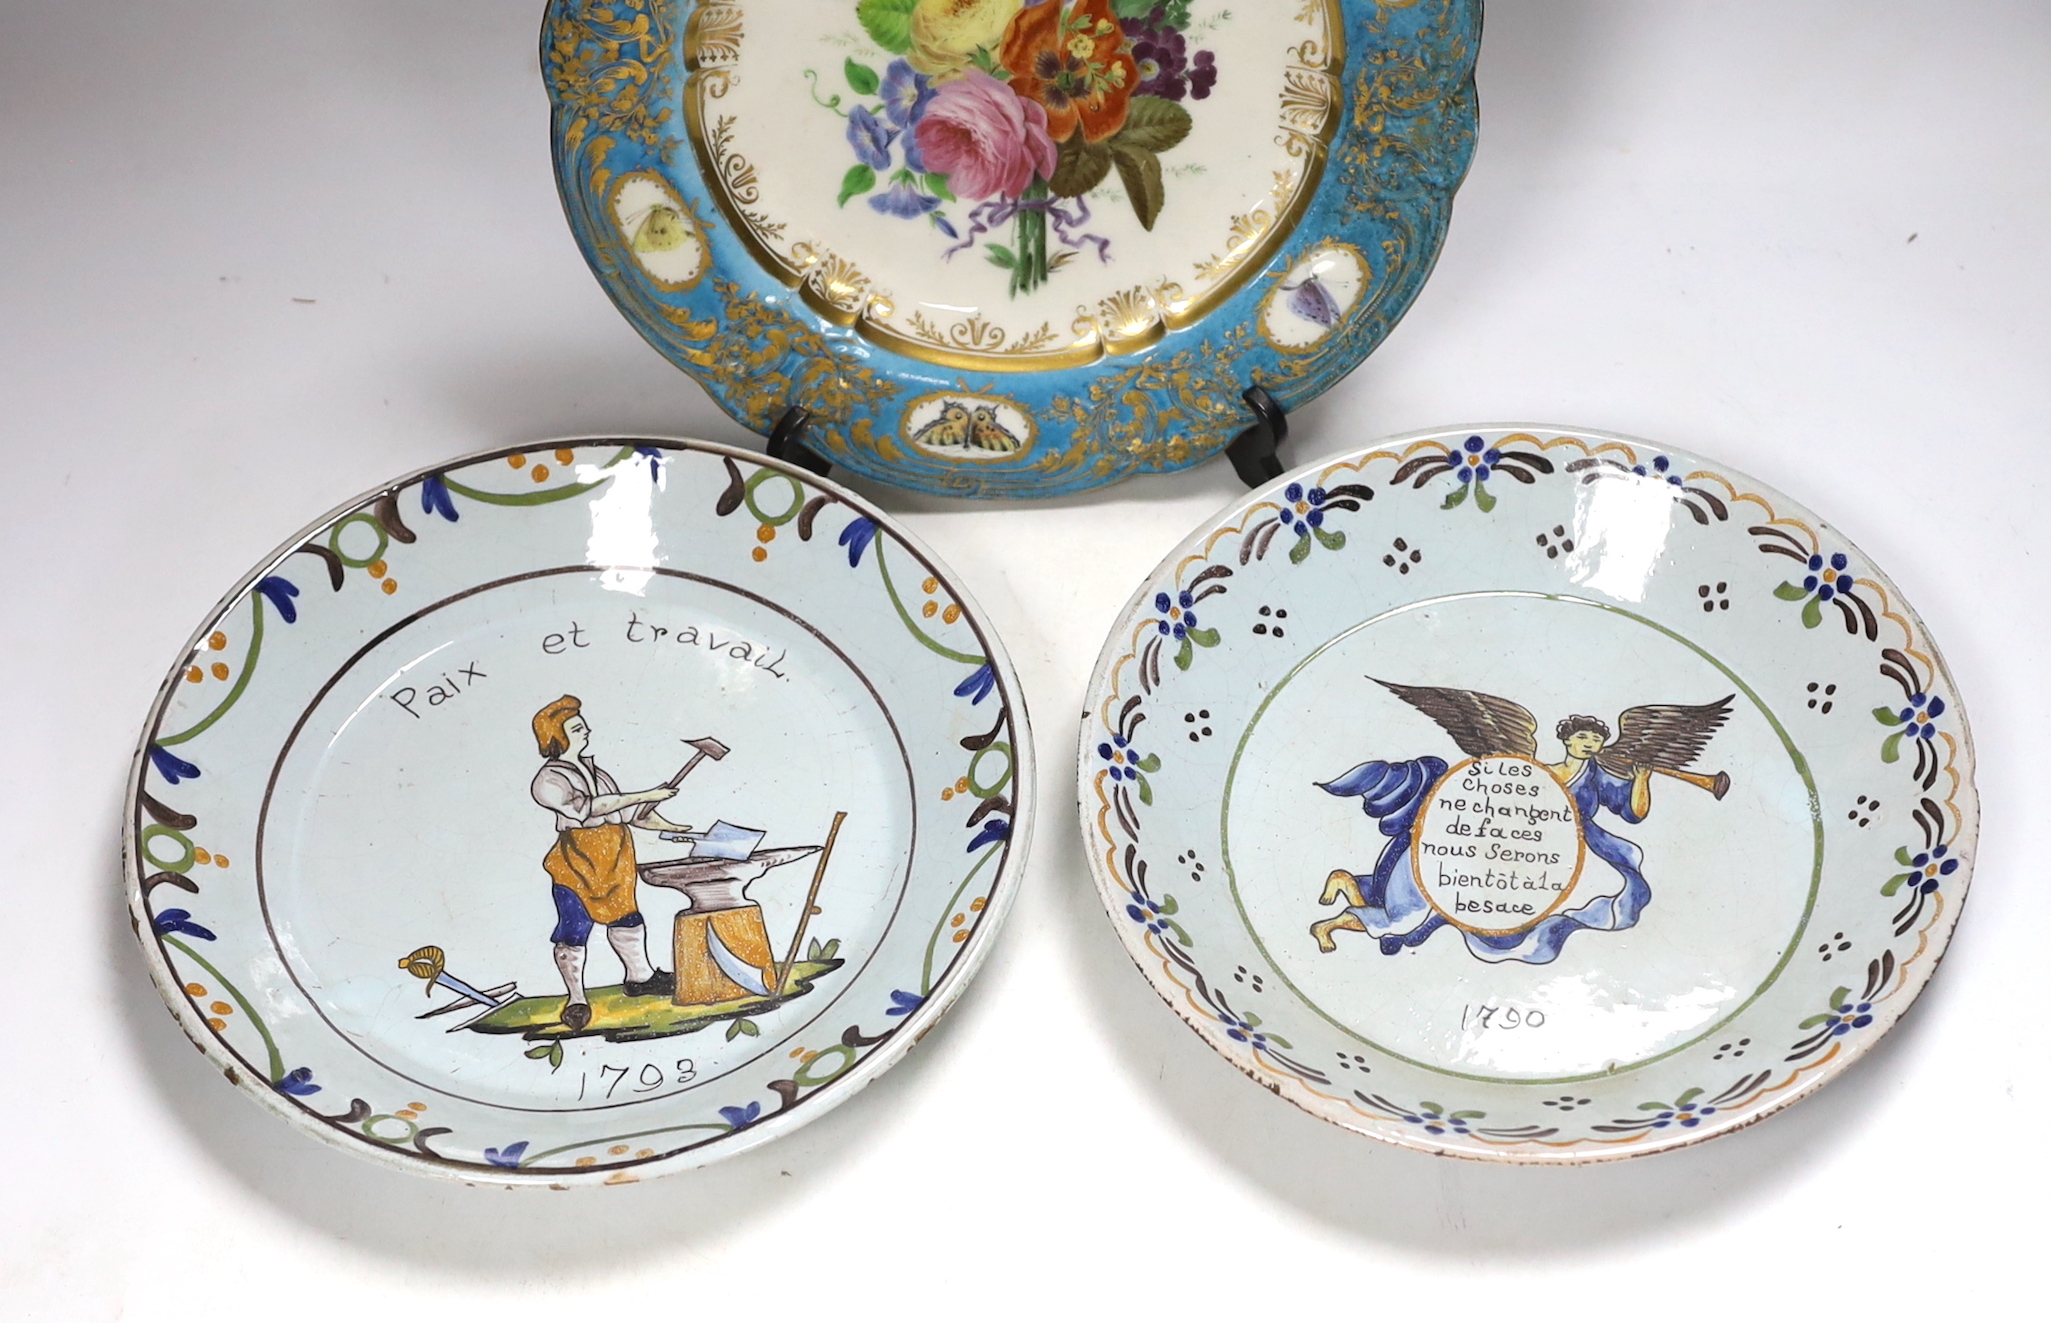 A pair of French revolution commemorative faience dishes and an 18th century Sevres plate, with later decoration, largest 23cm in diameter